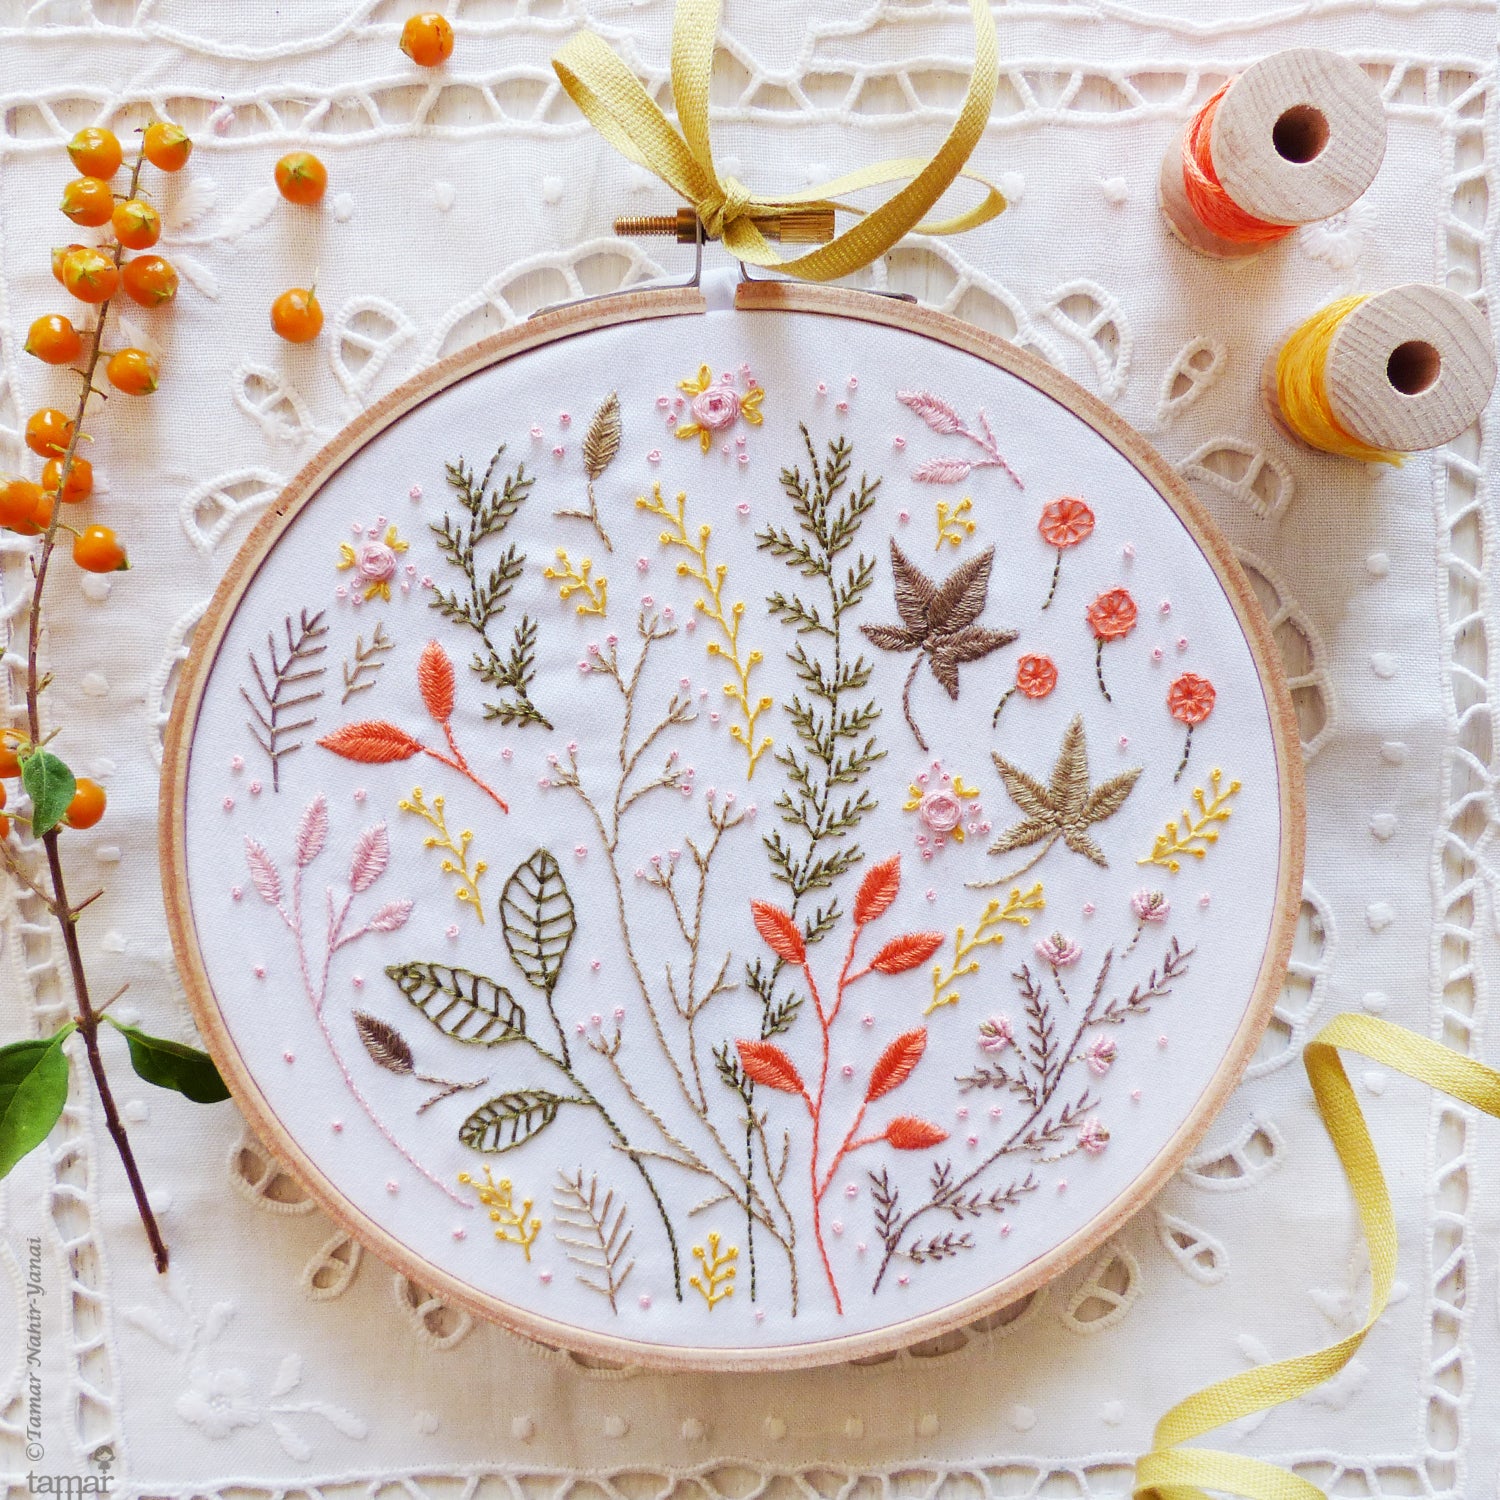 Magical Autumn Hand Embroidery Kit - Stitched Modern